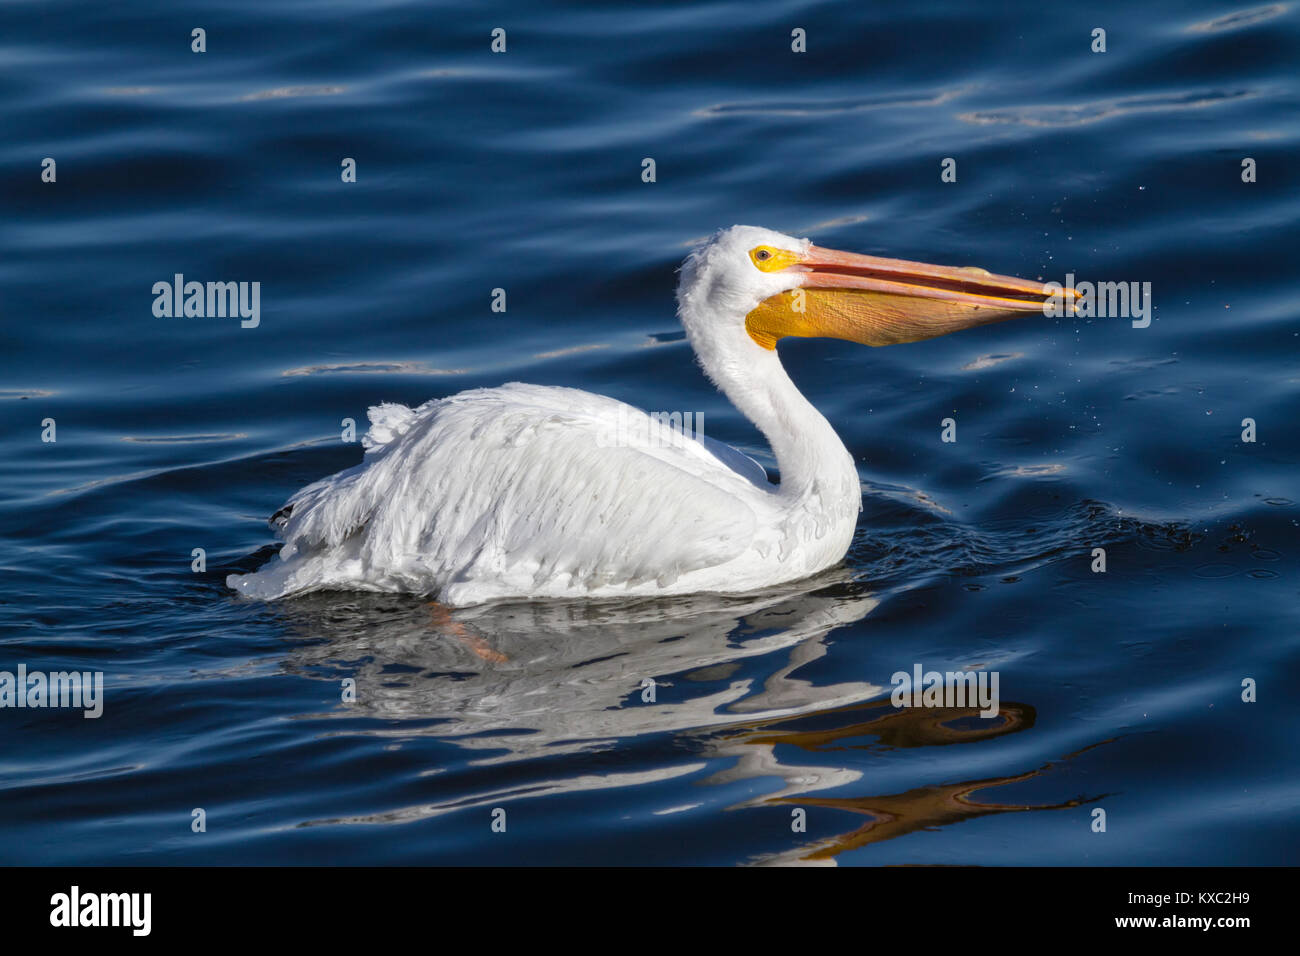 American White Pelican with fish in its beak Stock Photo